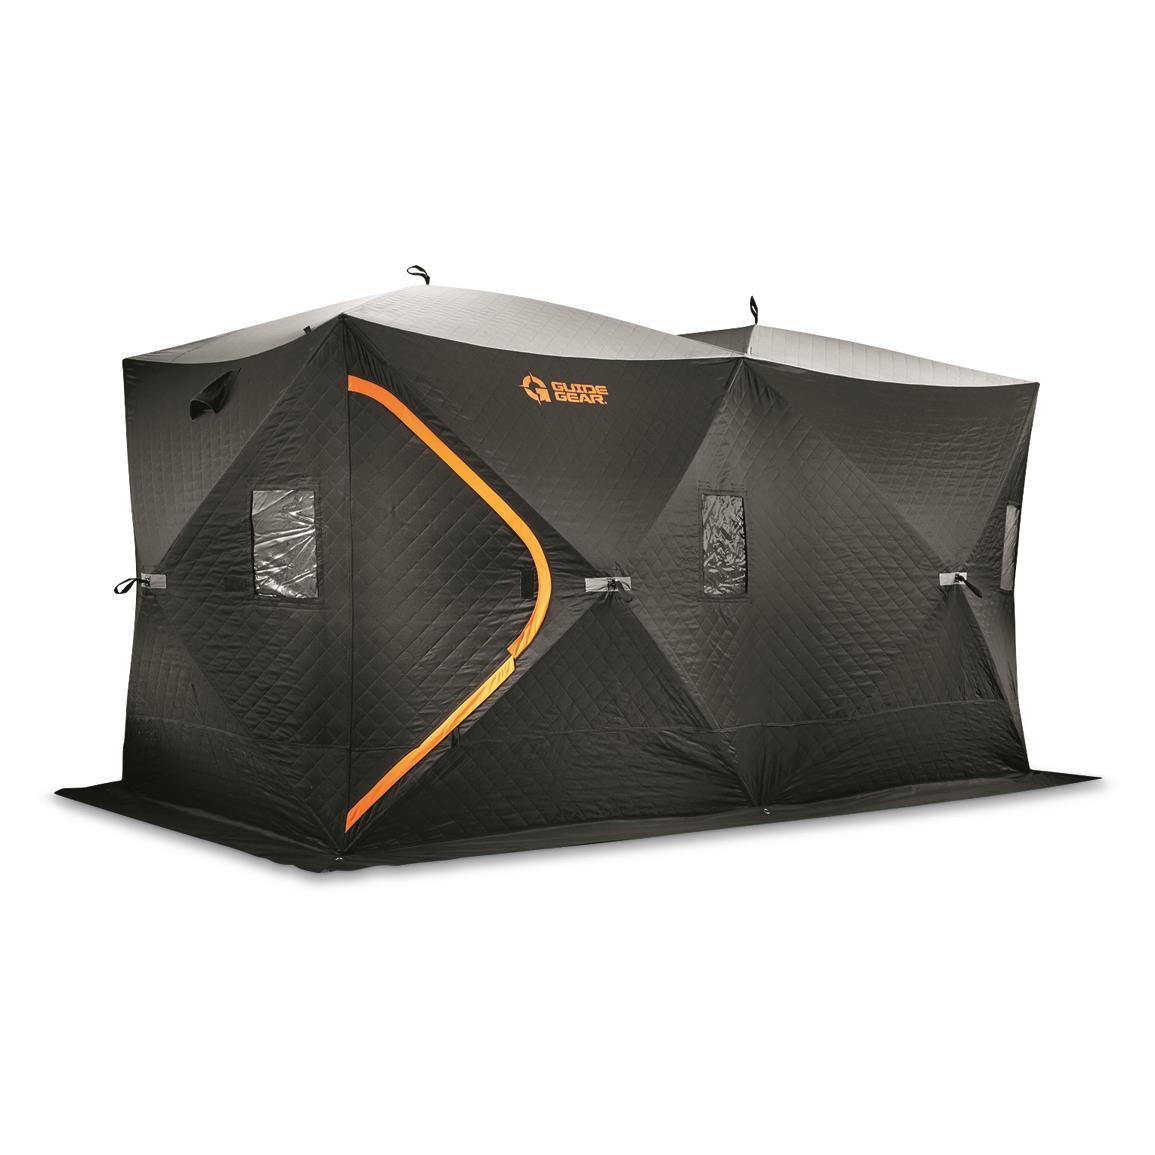 Guide Gear 6x12' Insulated Hub-style Ice Fishing Shelter